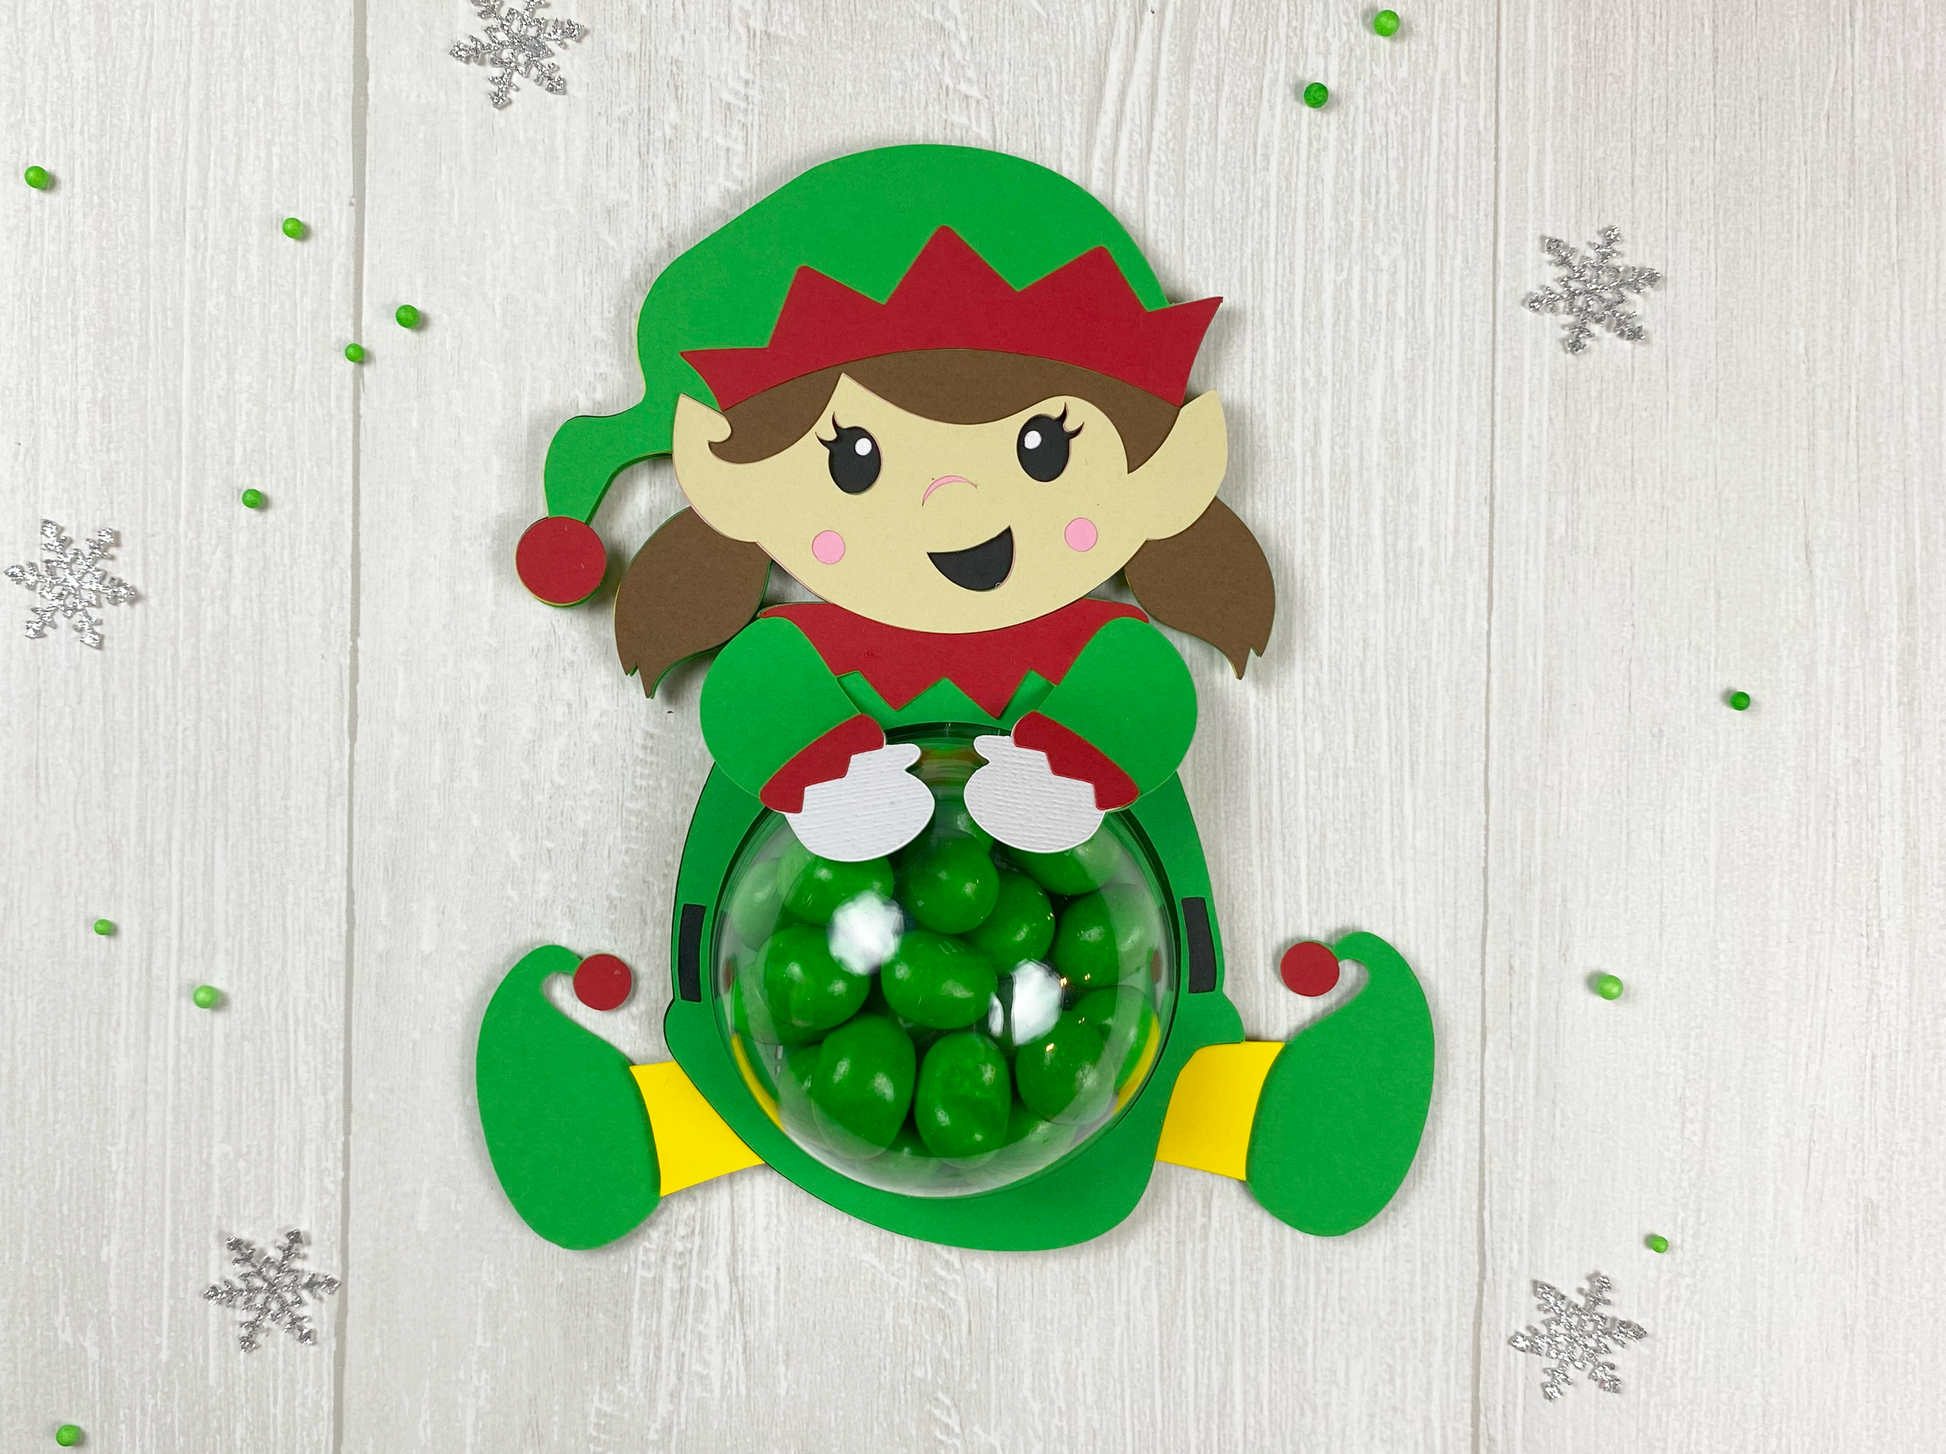 Cute girl elf dome candy holder. DIY template for Cricut or Silhouette. Perfect for stocking stuffers, party favors, class gifts.